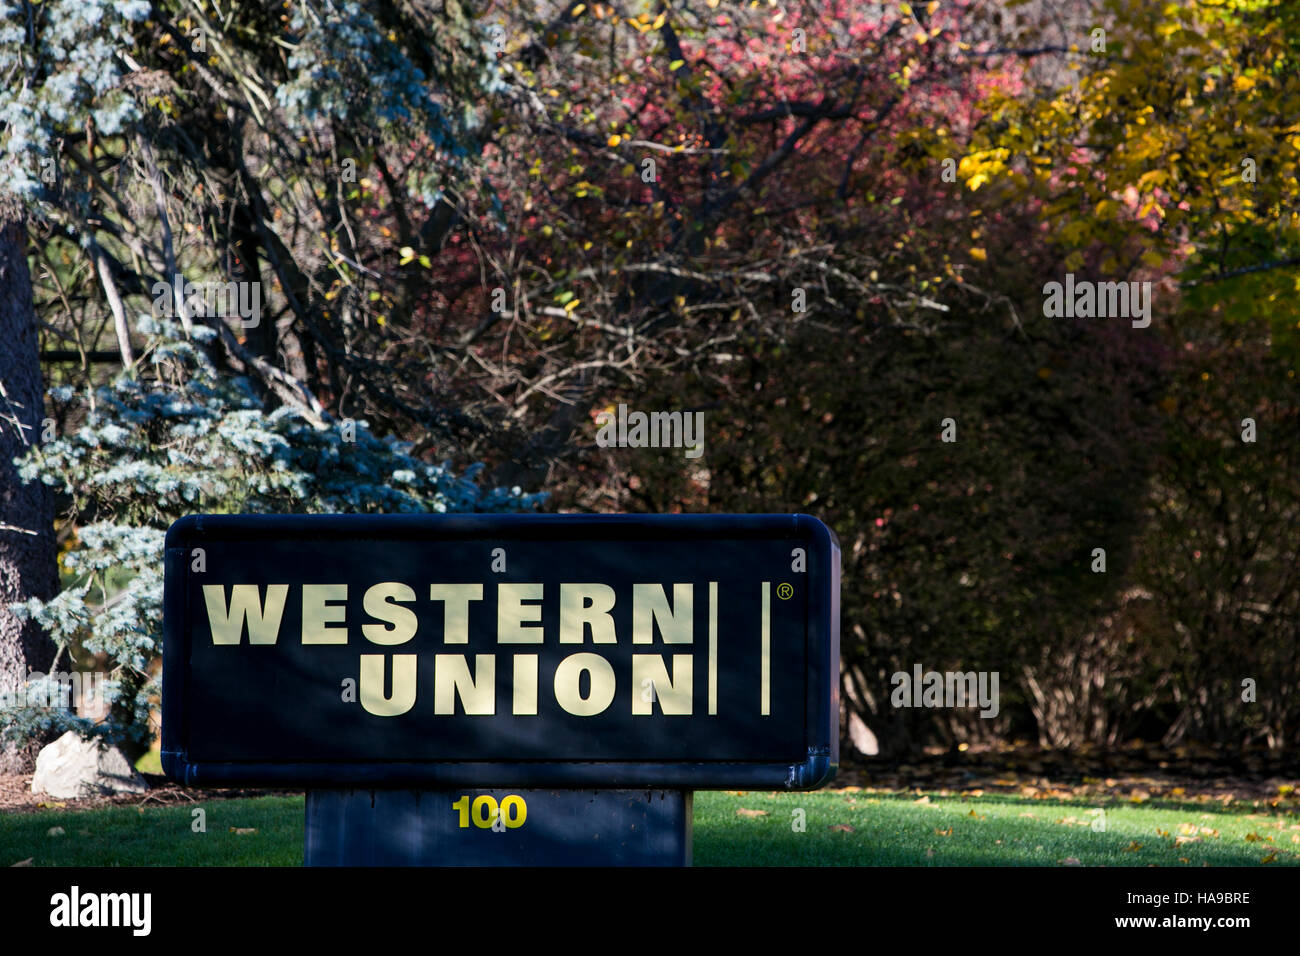 A logo sign outside of a facility occupied by The Western Union Company in Montvale, New Jersey on November 5, 2016. Stock Photo